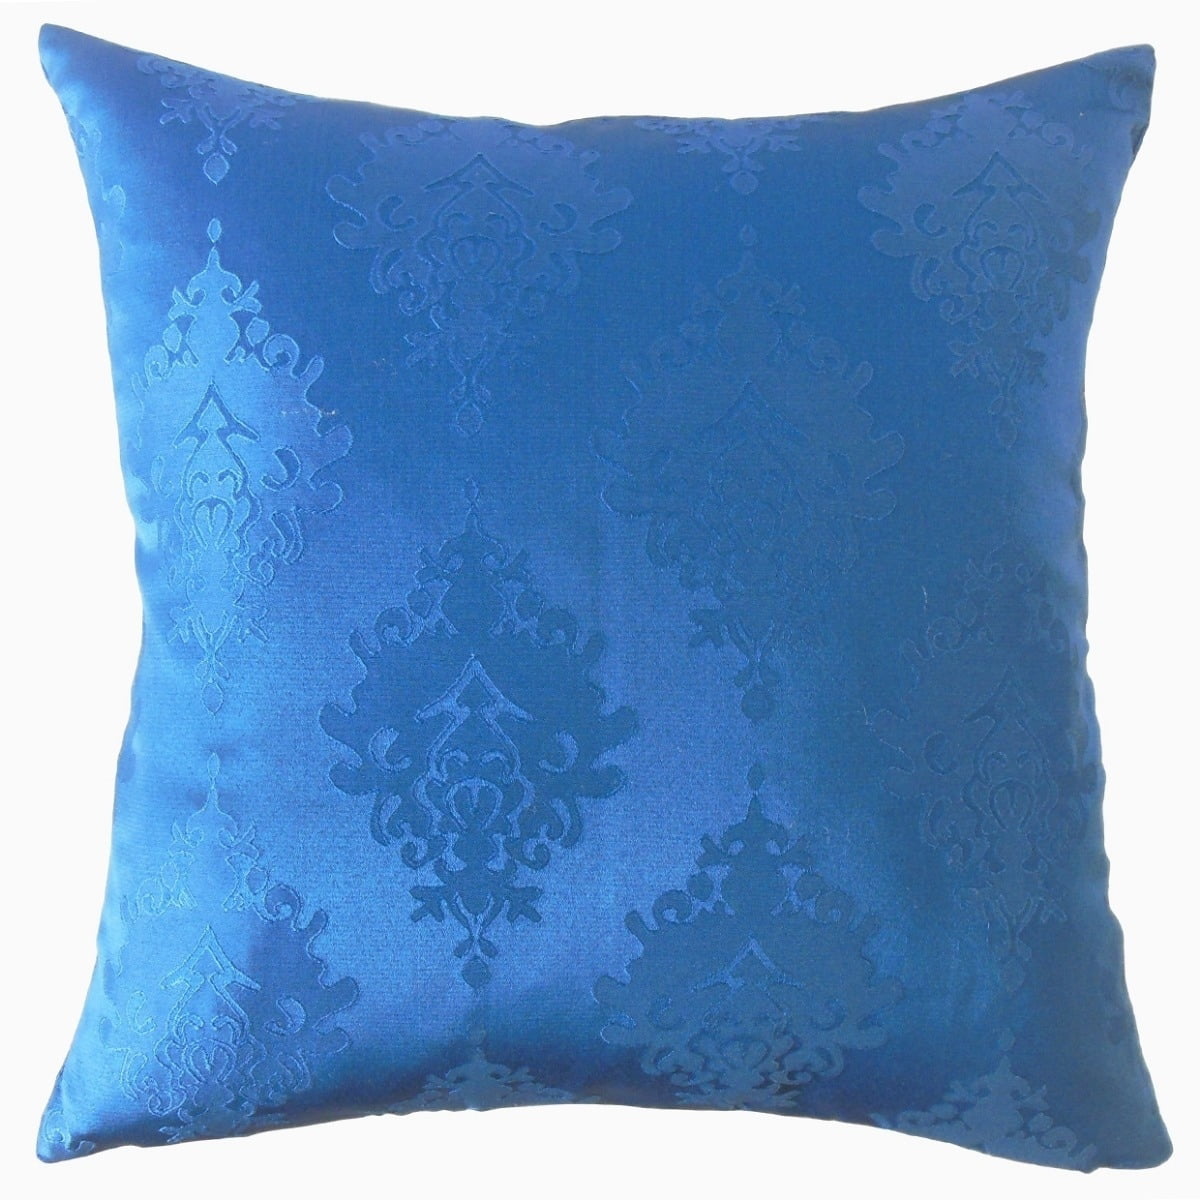 22 x 22 Blue The Pillow Collection Throw Pillow 